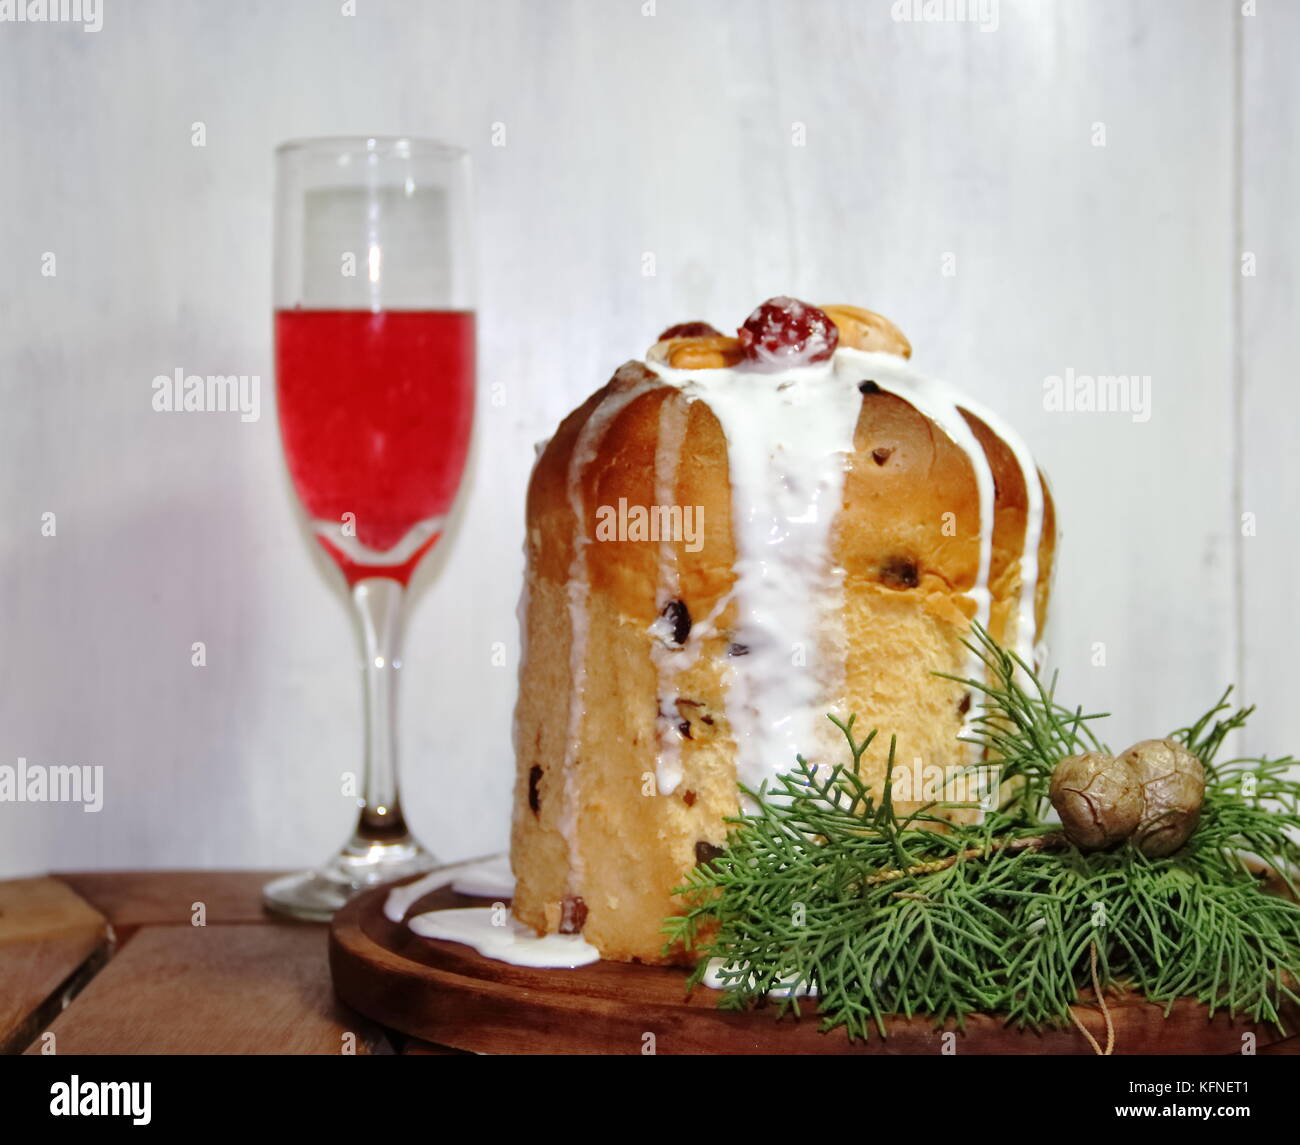 sweet bread Christmas pudding cin dried and glazed fruits and sparkling beverages Stock Photo